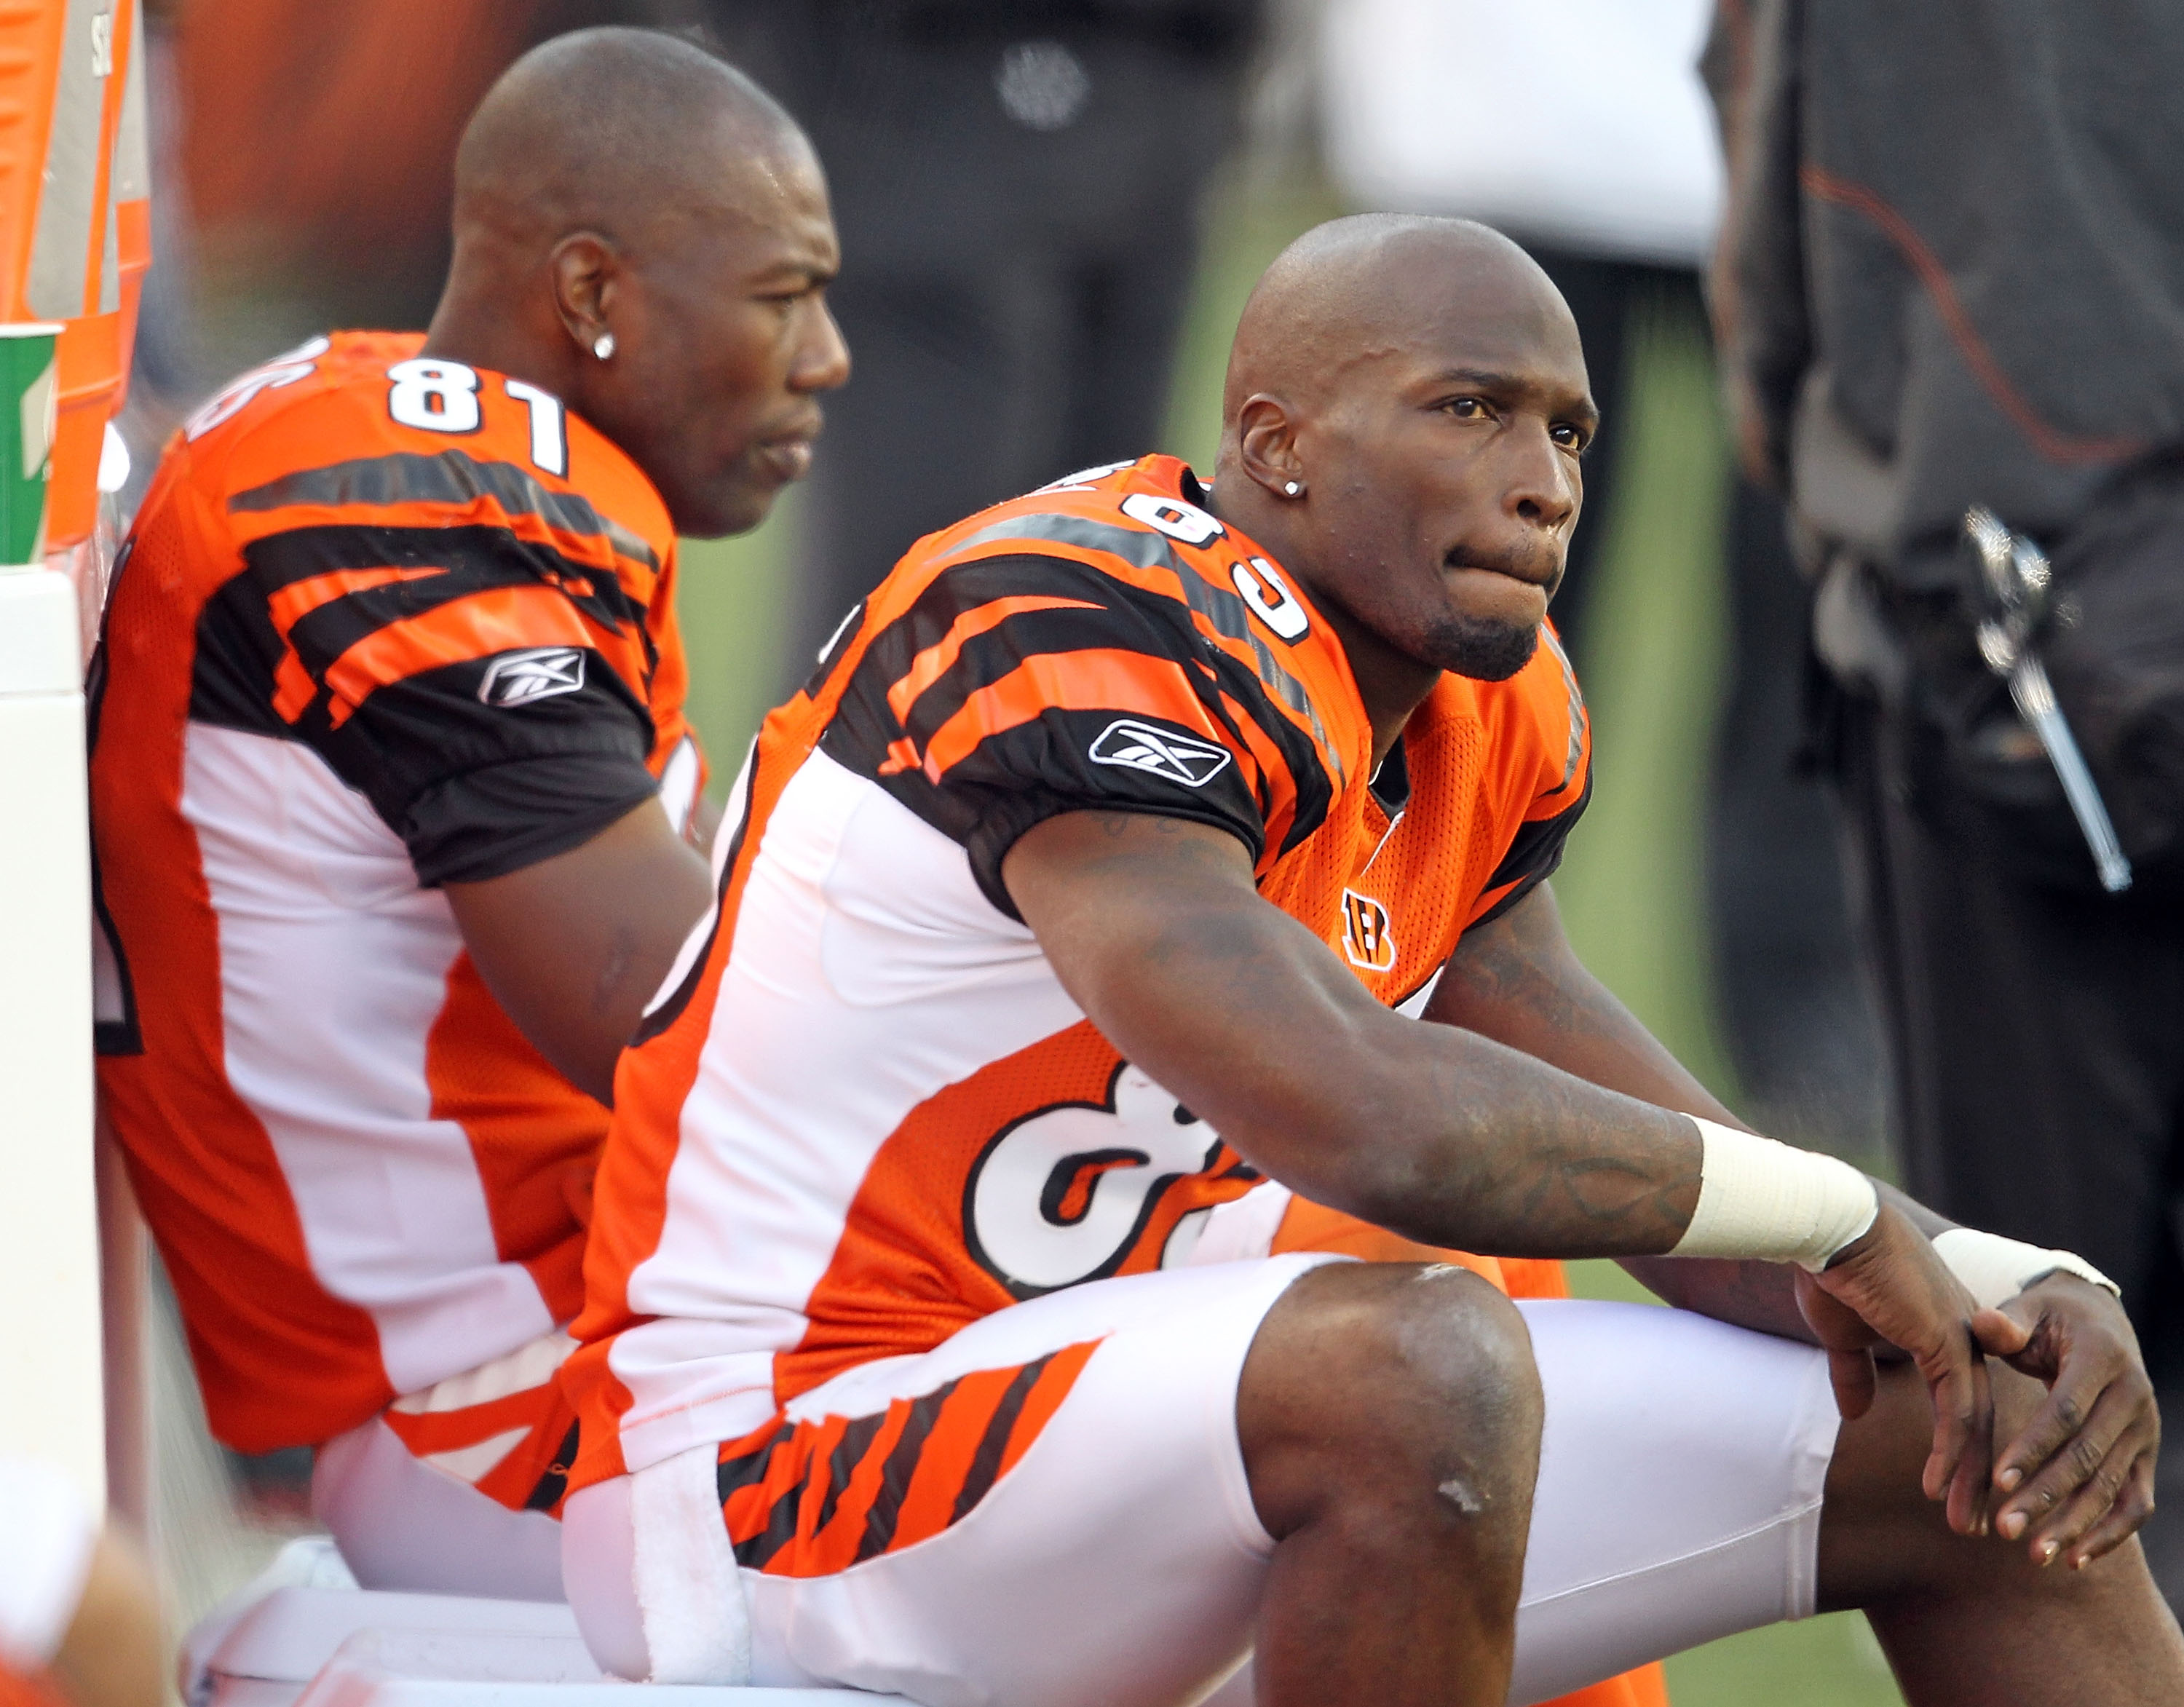 CINCINNATI - NOVEMBER 21:  Chad Ochocinco #85 and Terrell Owens #81 of the Cincinnati Bengals watch from the sideline during the final minutes of the Bengals 49-31 loss to the Buffalo Bills at Paul Brown Stadium on November 21, 2010 in Cincinnati, Ohio.